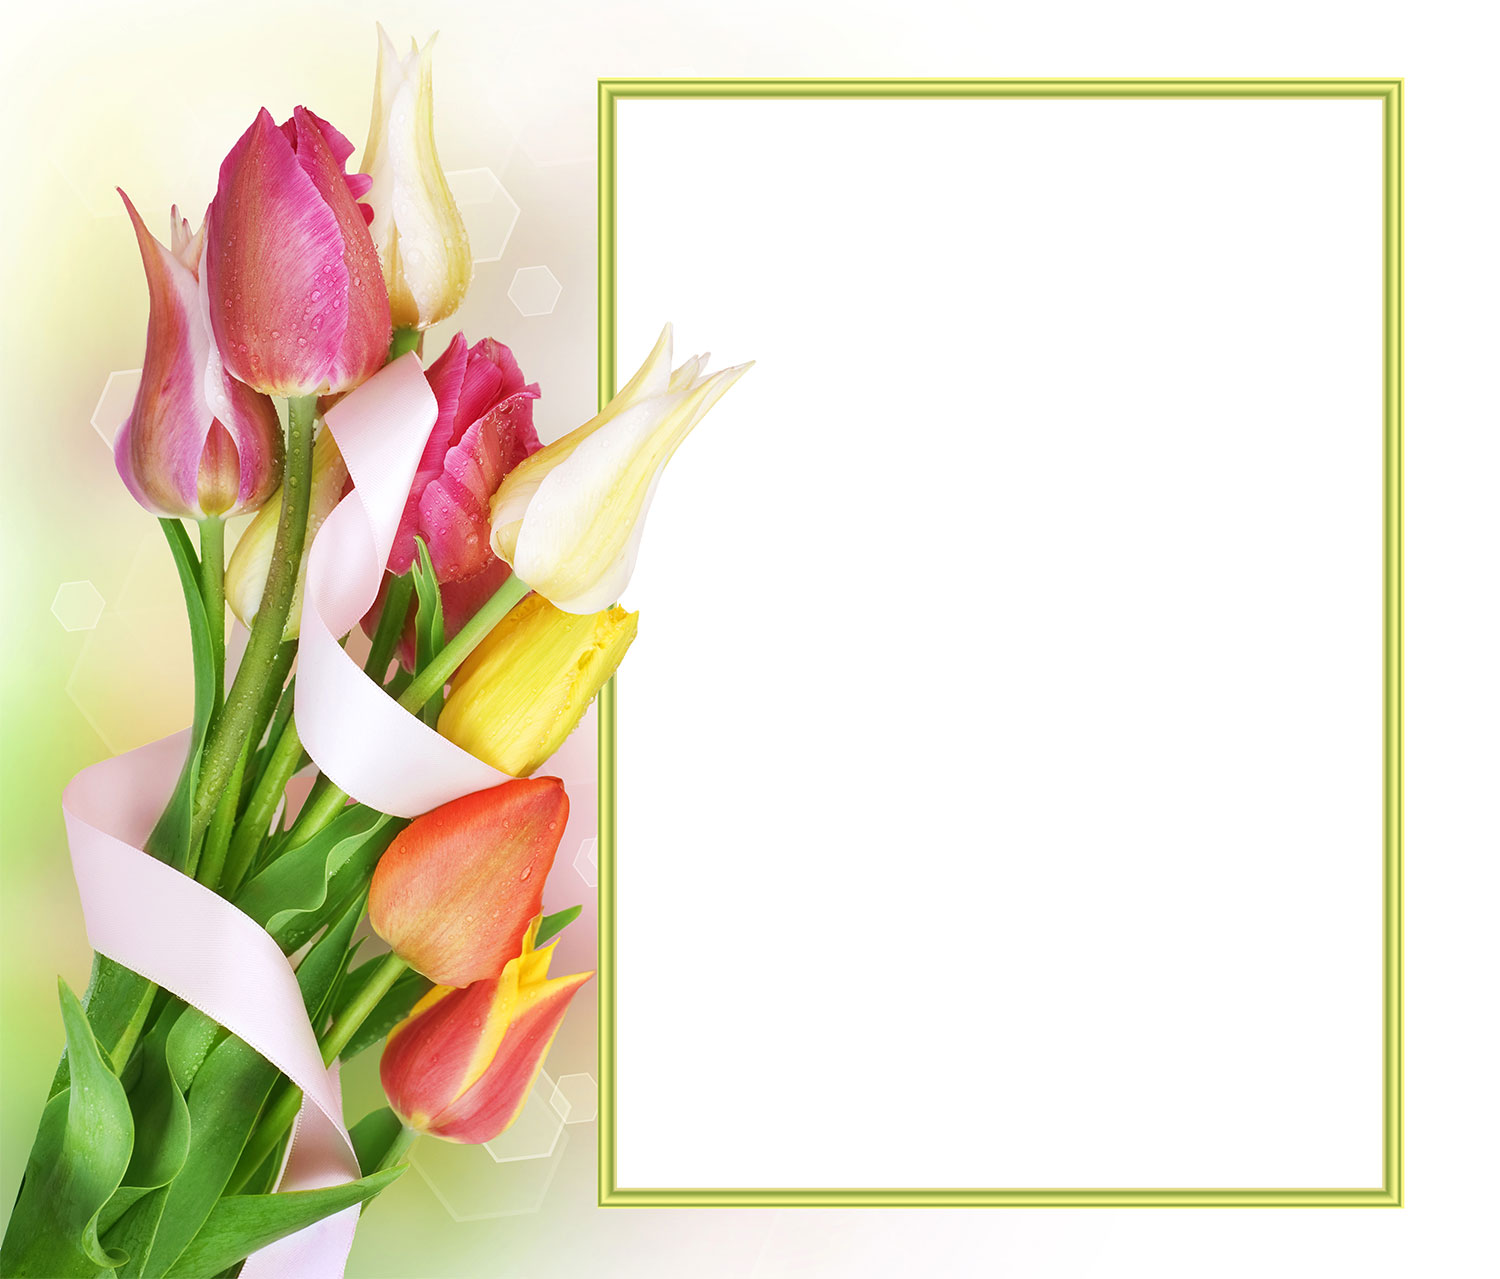 Flowers Photo Frames | LoonaPix - Roses, Tulips, Poppies! (60+ frames)